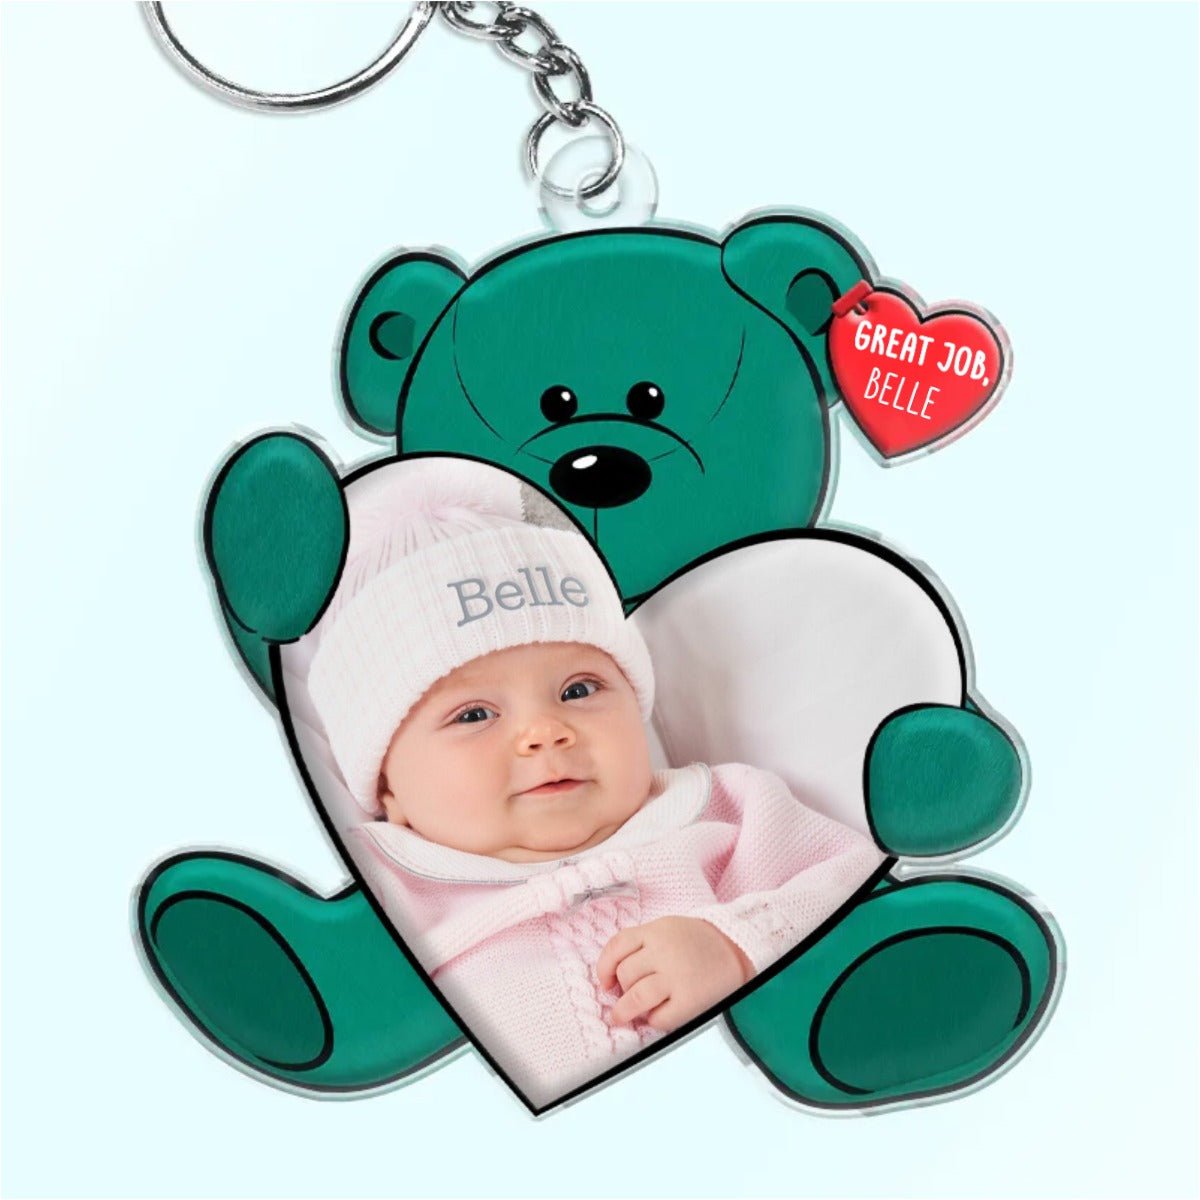 Family - You're Doing Great Bear Hug - Personalized Acrylic Keychain - The Next Custom Gift